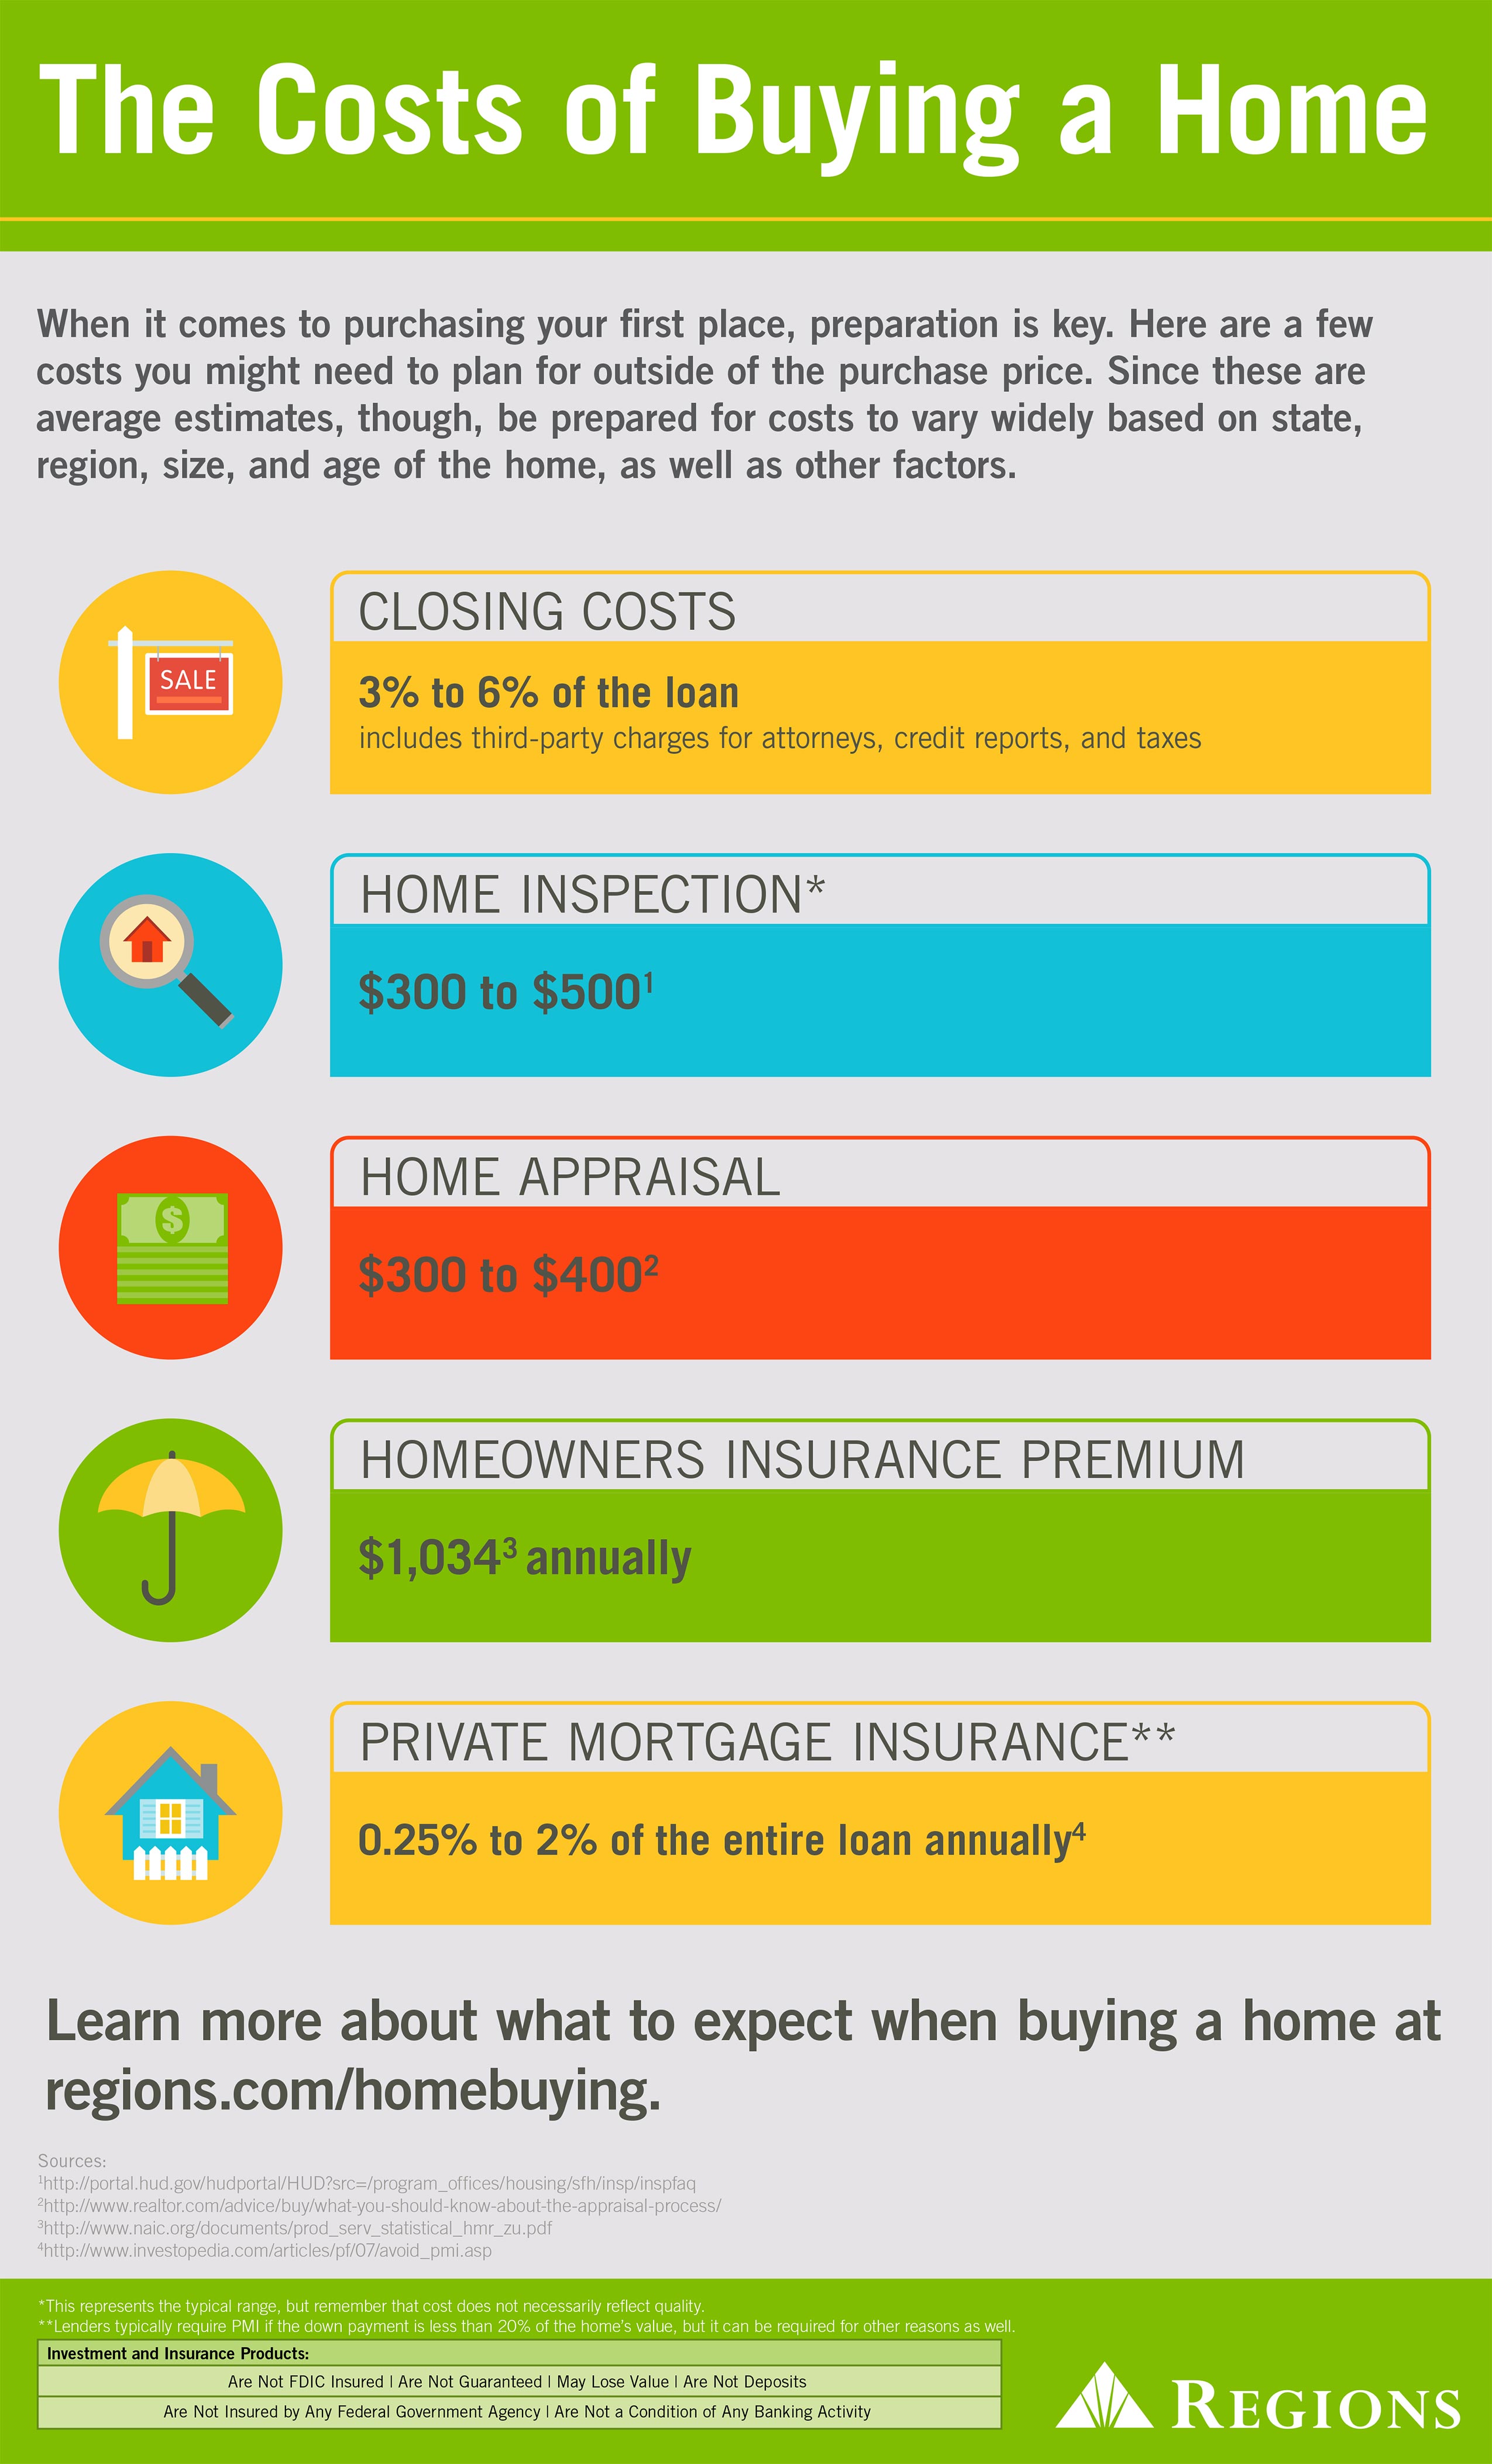 Cost of Buying a Home Infographic